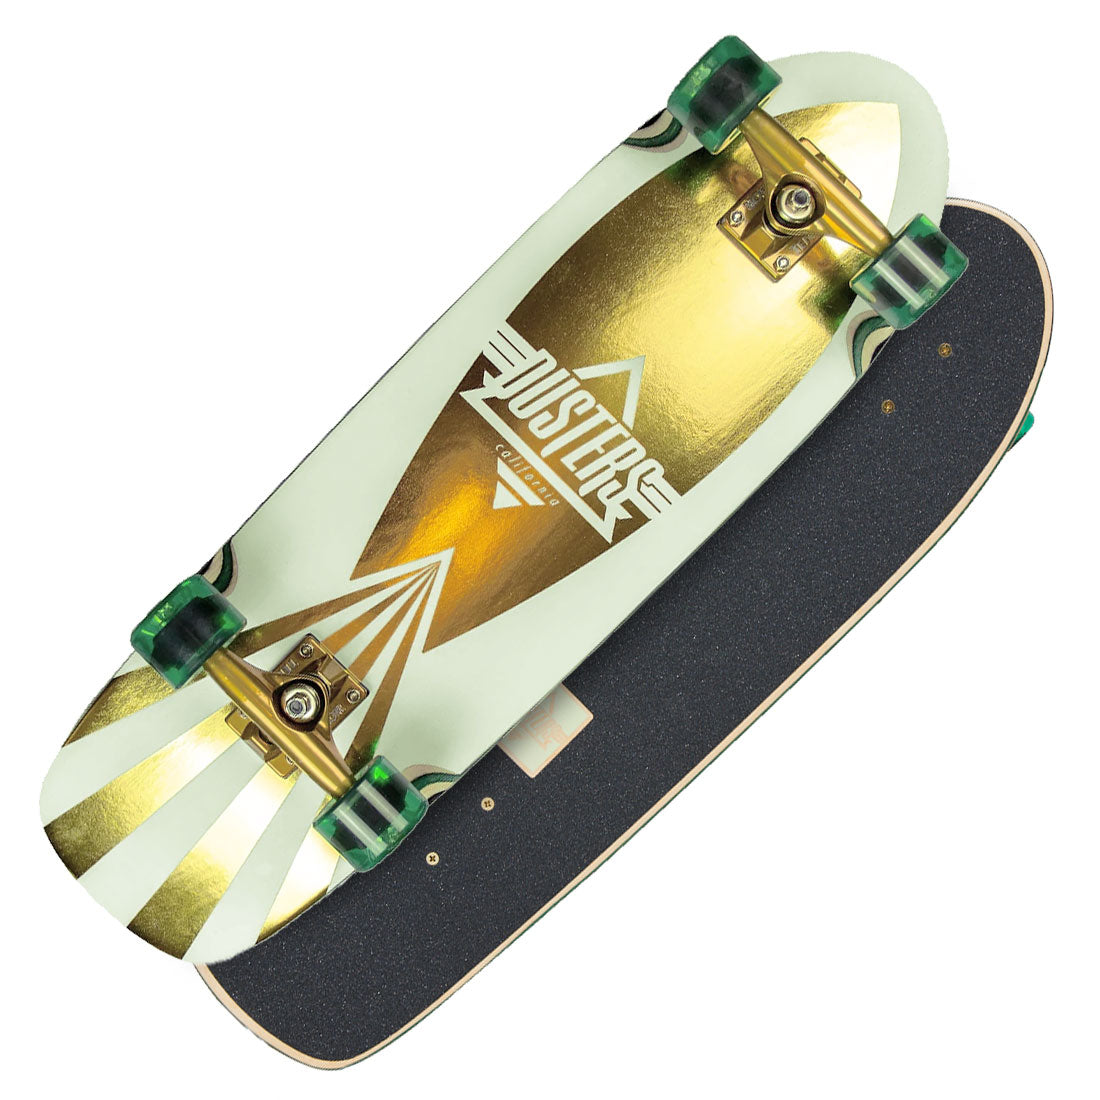 Dusters Cazh UV Cruiser 29.5 Complete - Green/Gold Skateboard Compl Cruisers